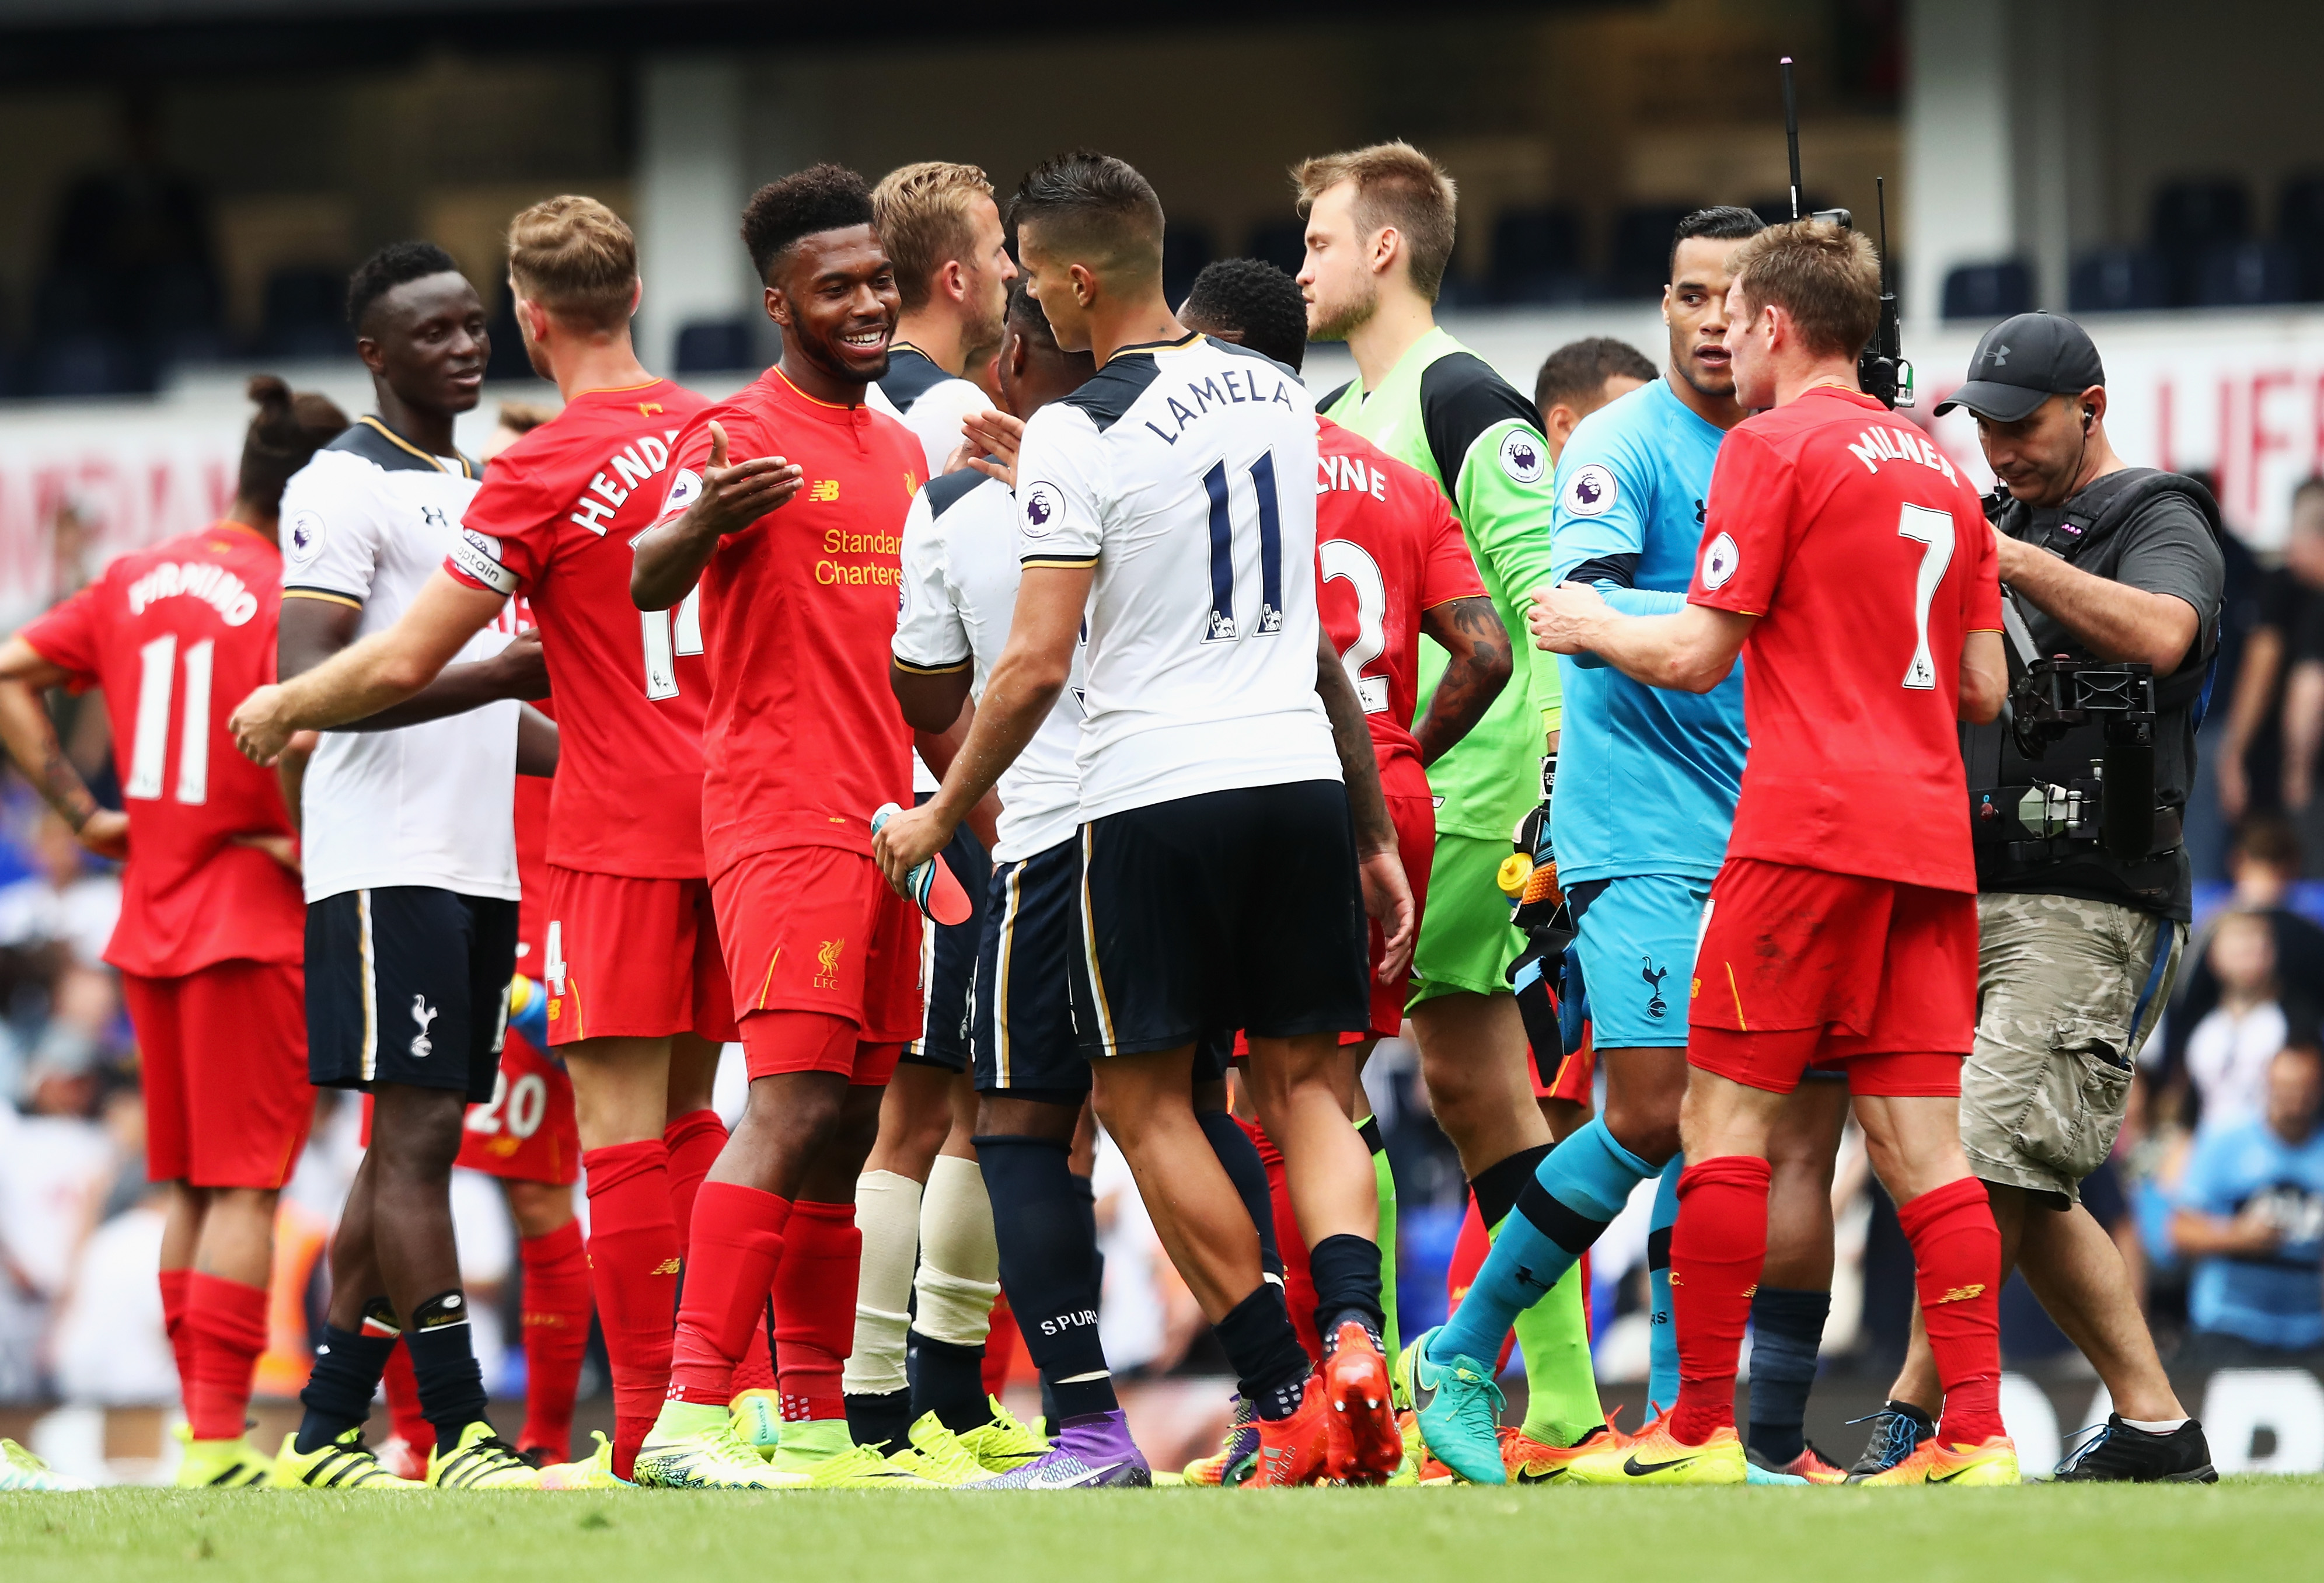 LONDON, ENGLAND - AUGUST 27: Tottenham Hotspur and Liverpool players exchange words after the final whistle during the Premier League match between Tottenham Hotspur and Liverpool at White Hart Lane on August 27, 2016 in London, England.  (Photo by Julian Finney/Getty Images)